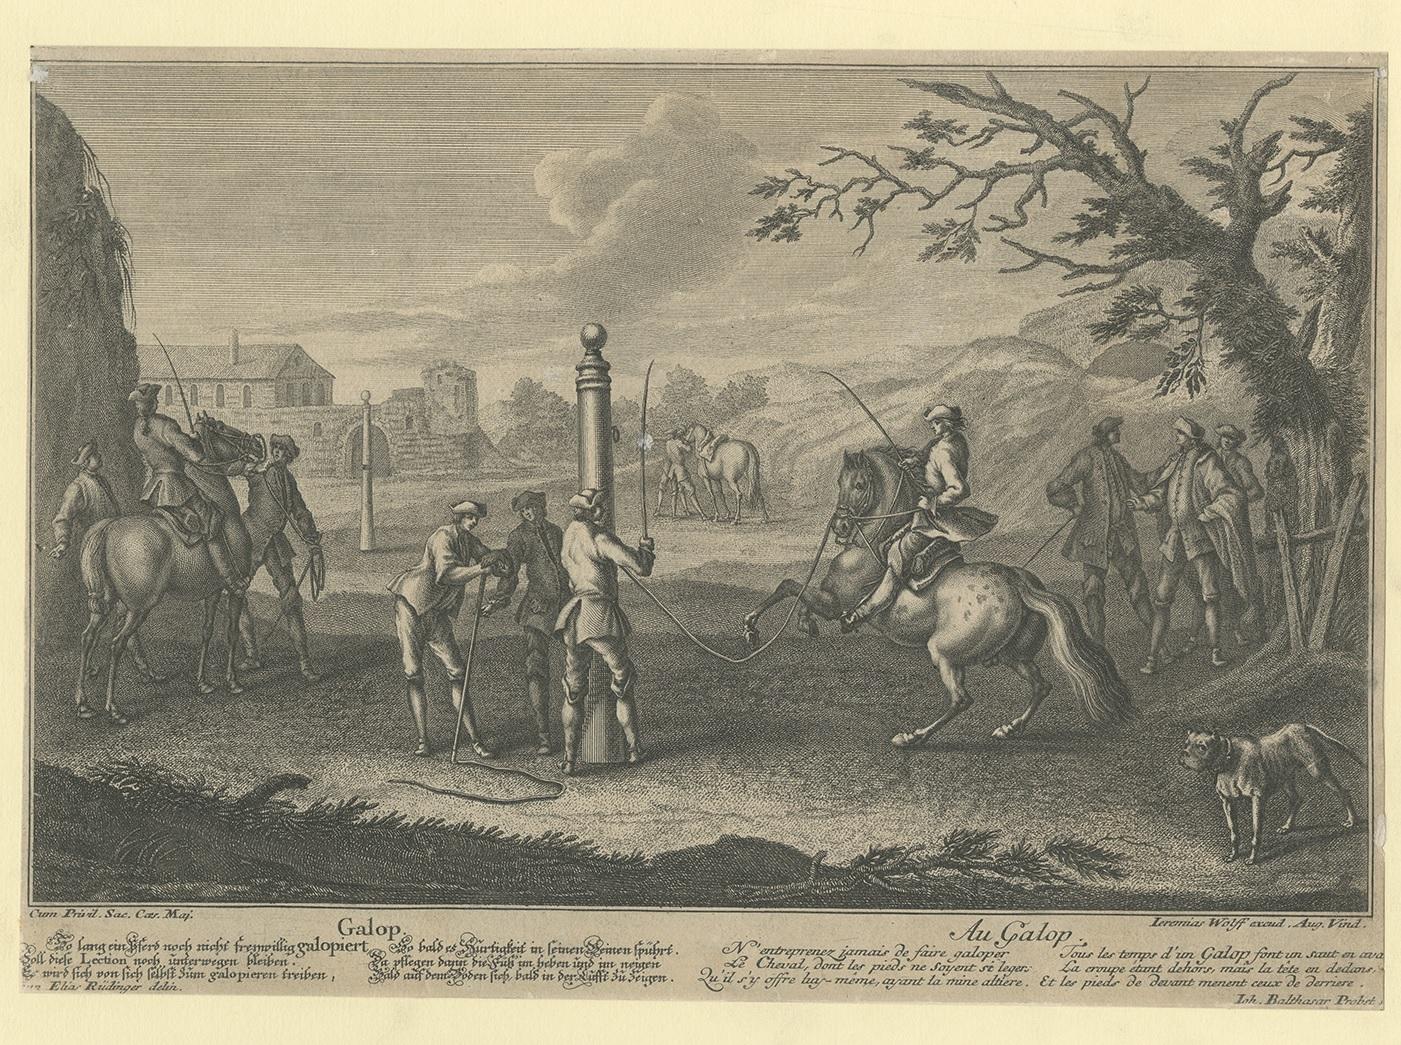 Antique print titled 'Galop - Au Galop'. This print originates from 'Neue Reitkunst' published by J. Wolff. Lithographed by J.B. Probst after J.E. Ridinger.